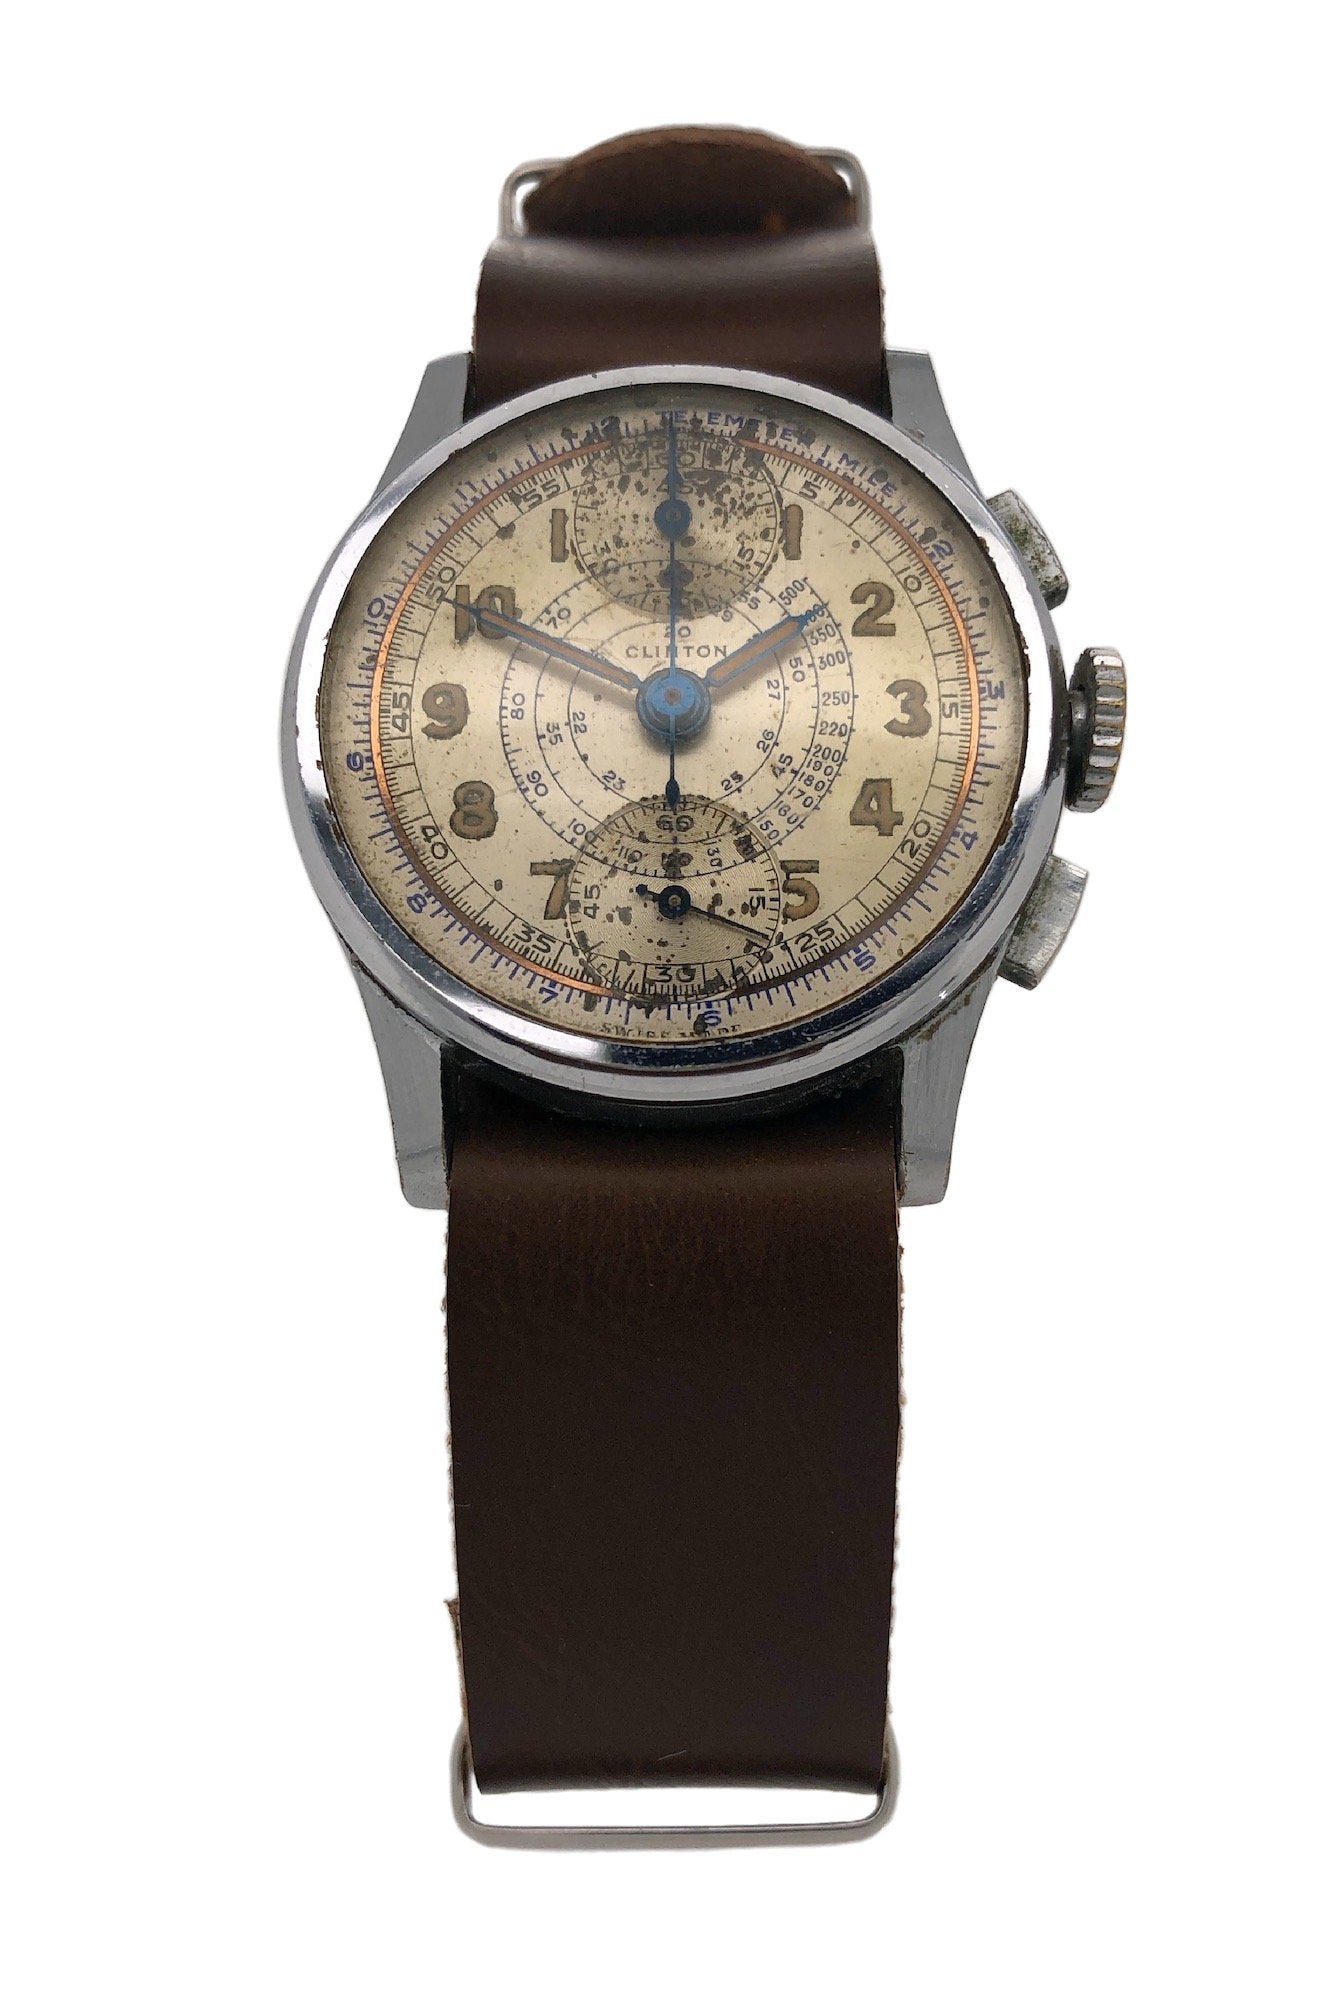 Clinton Watch Co Chronograph - Counting Time Watch Purveyors